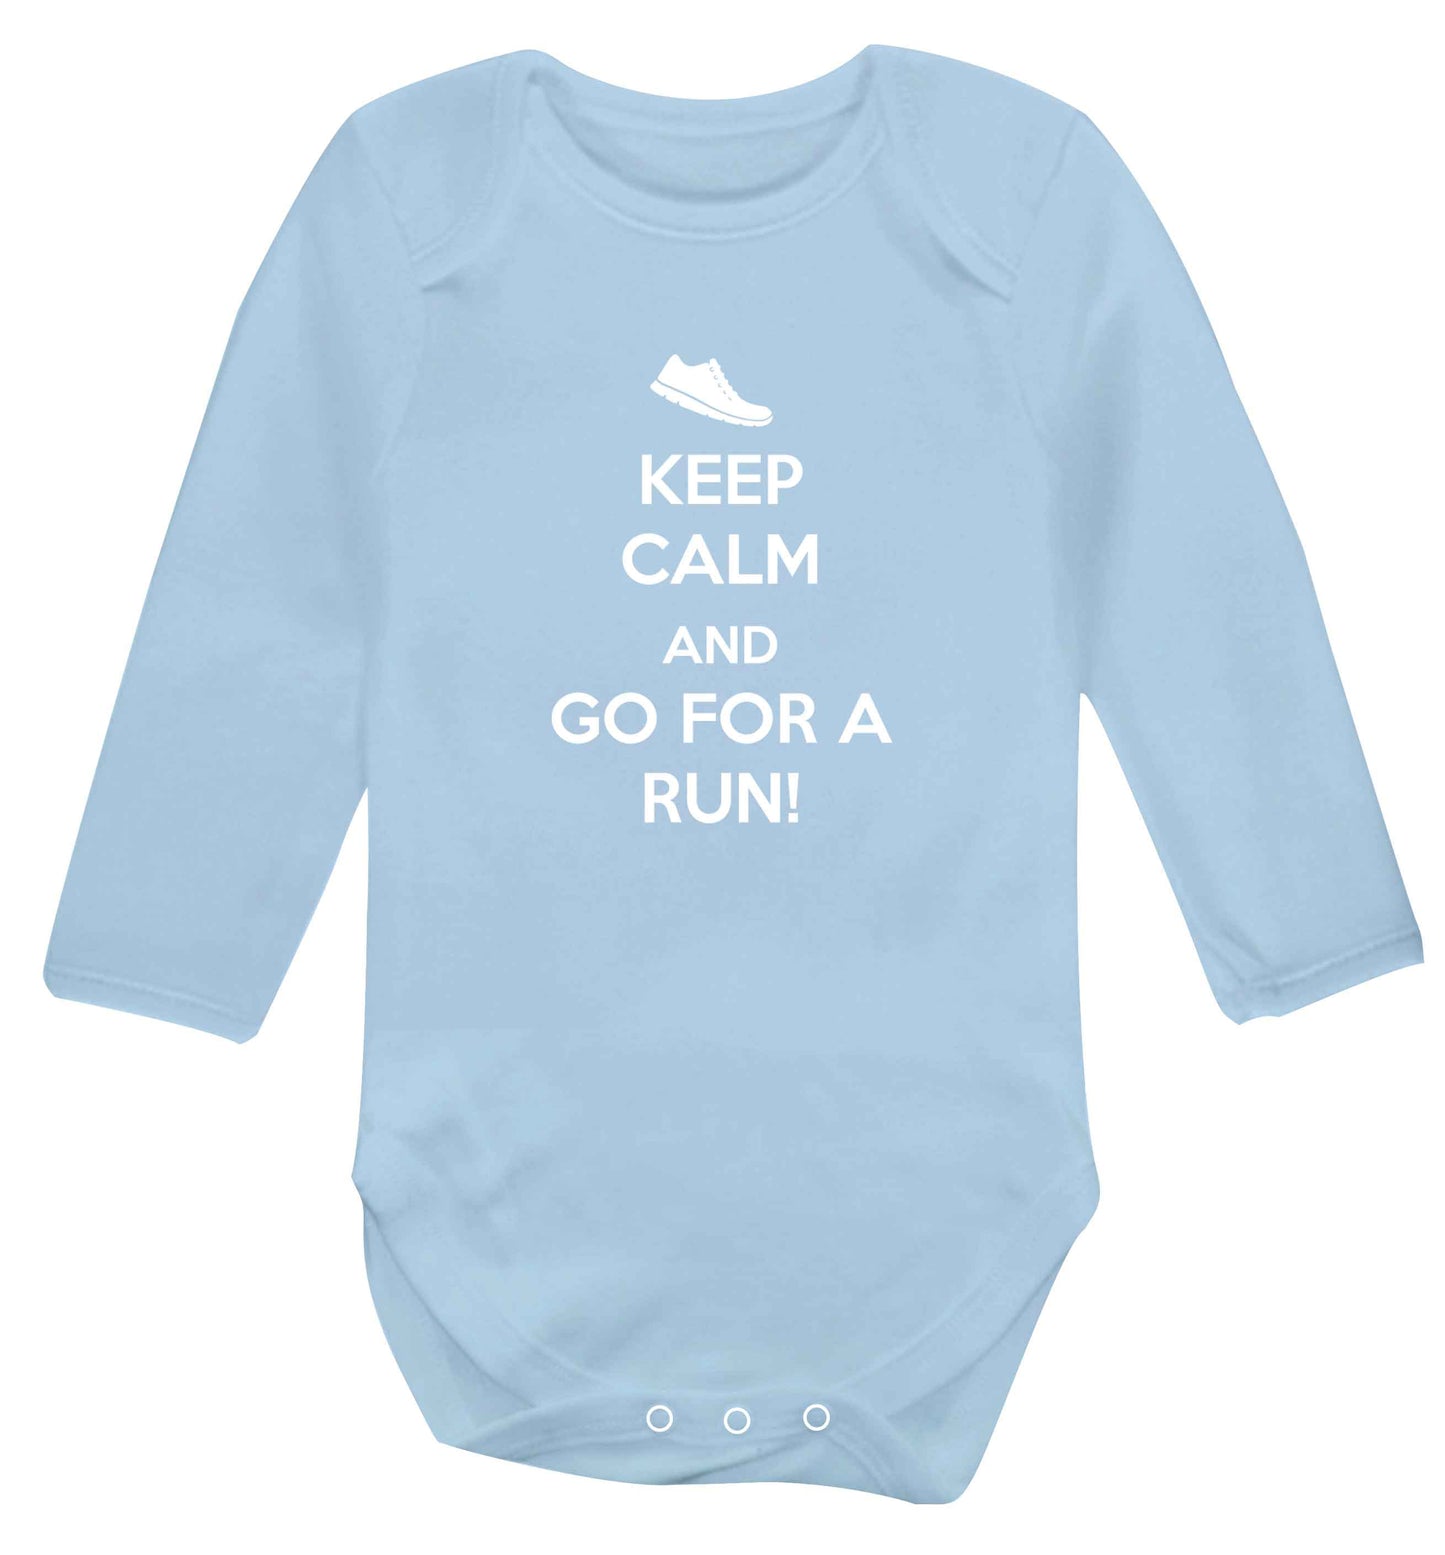 Keep calm and go for a run baby vest long sleeved pale blue 6-12 months